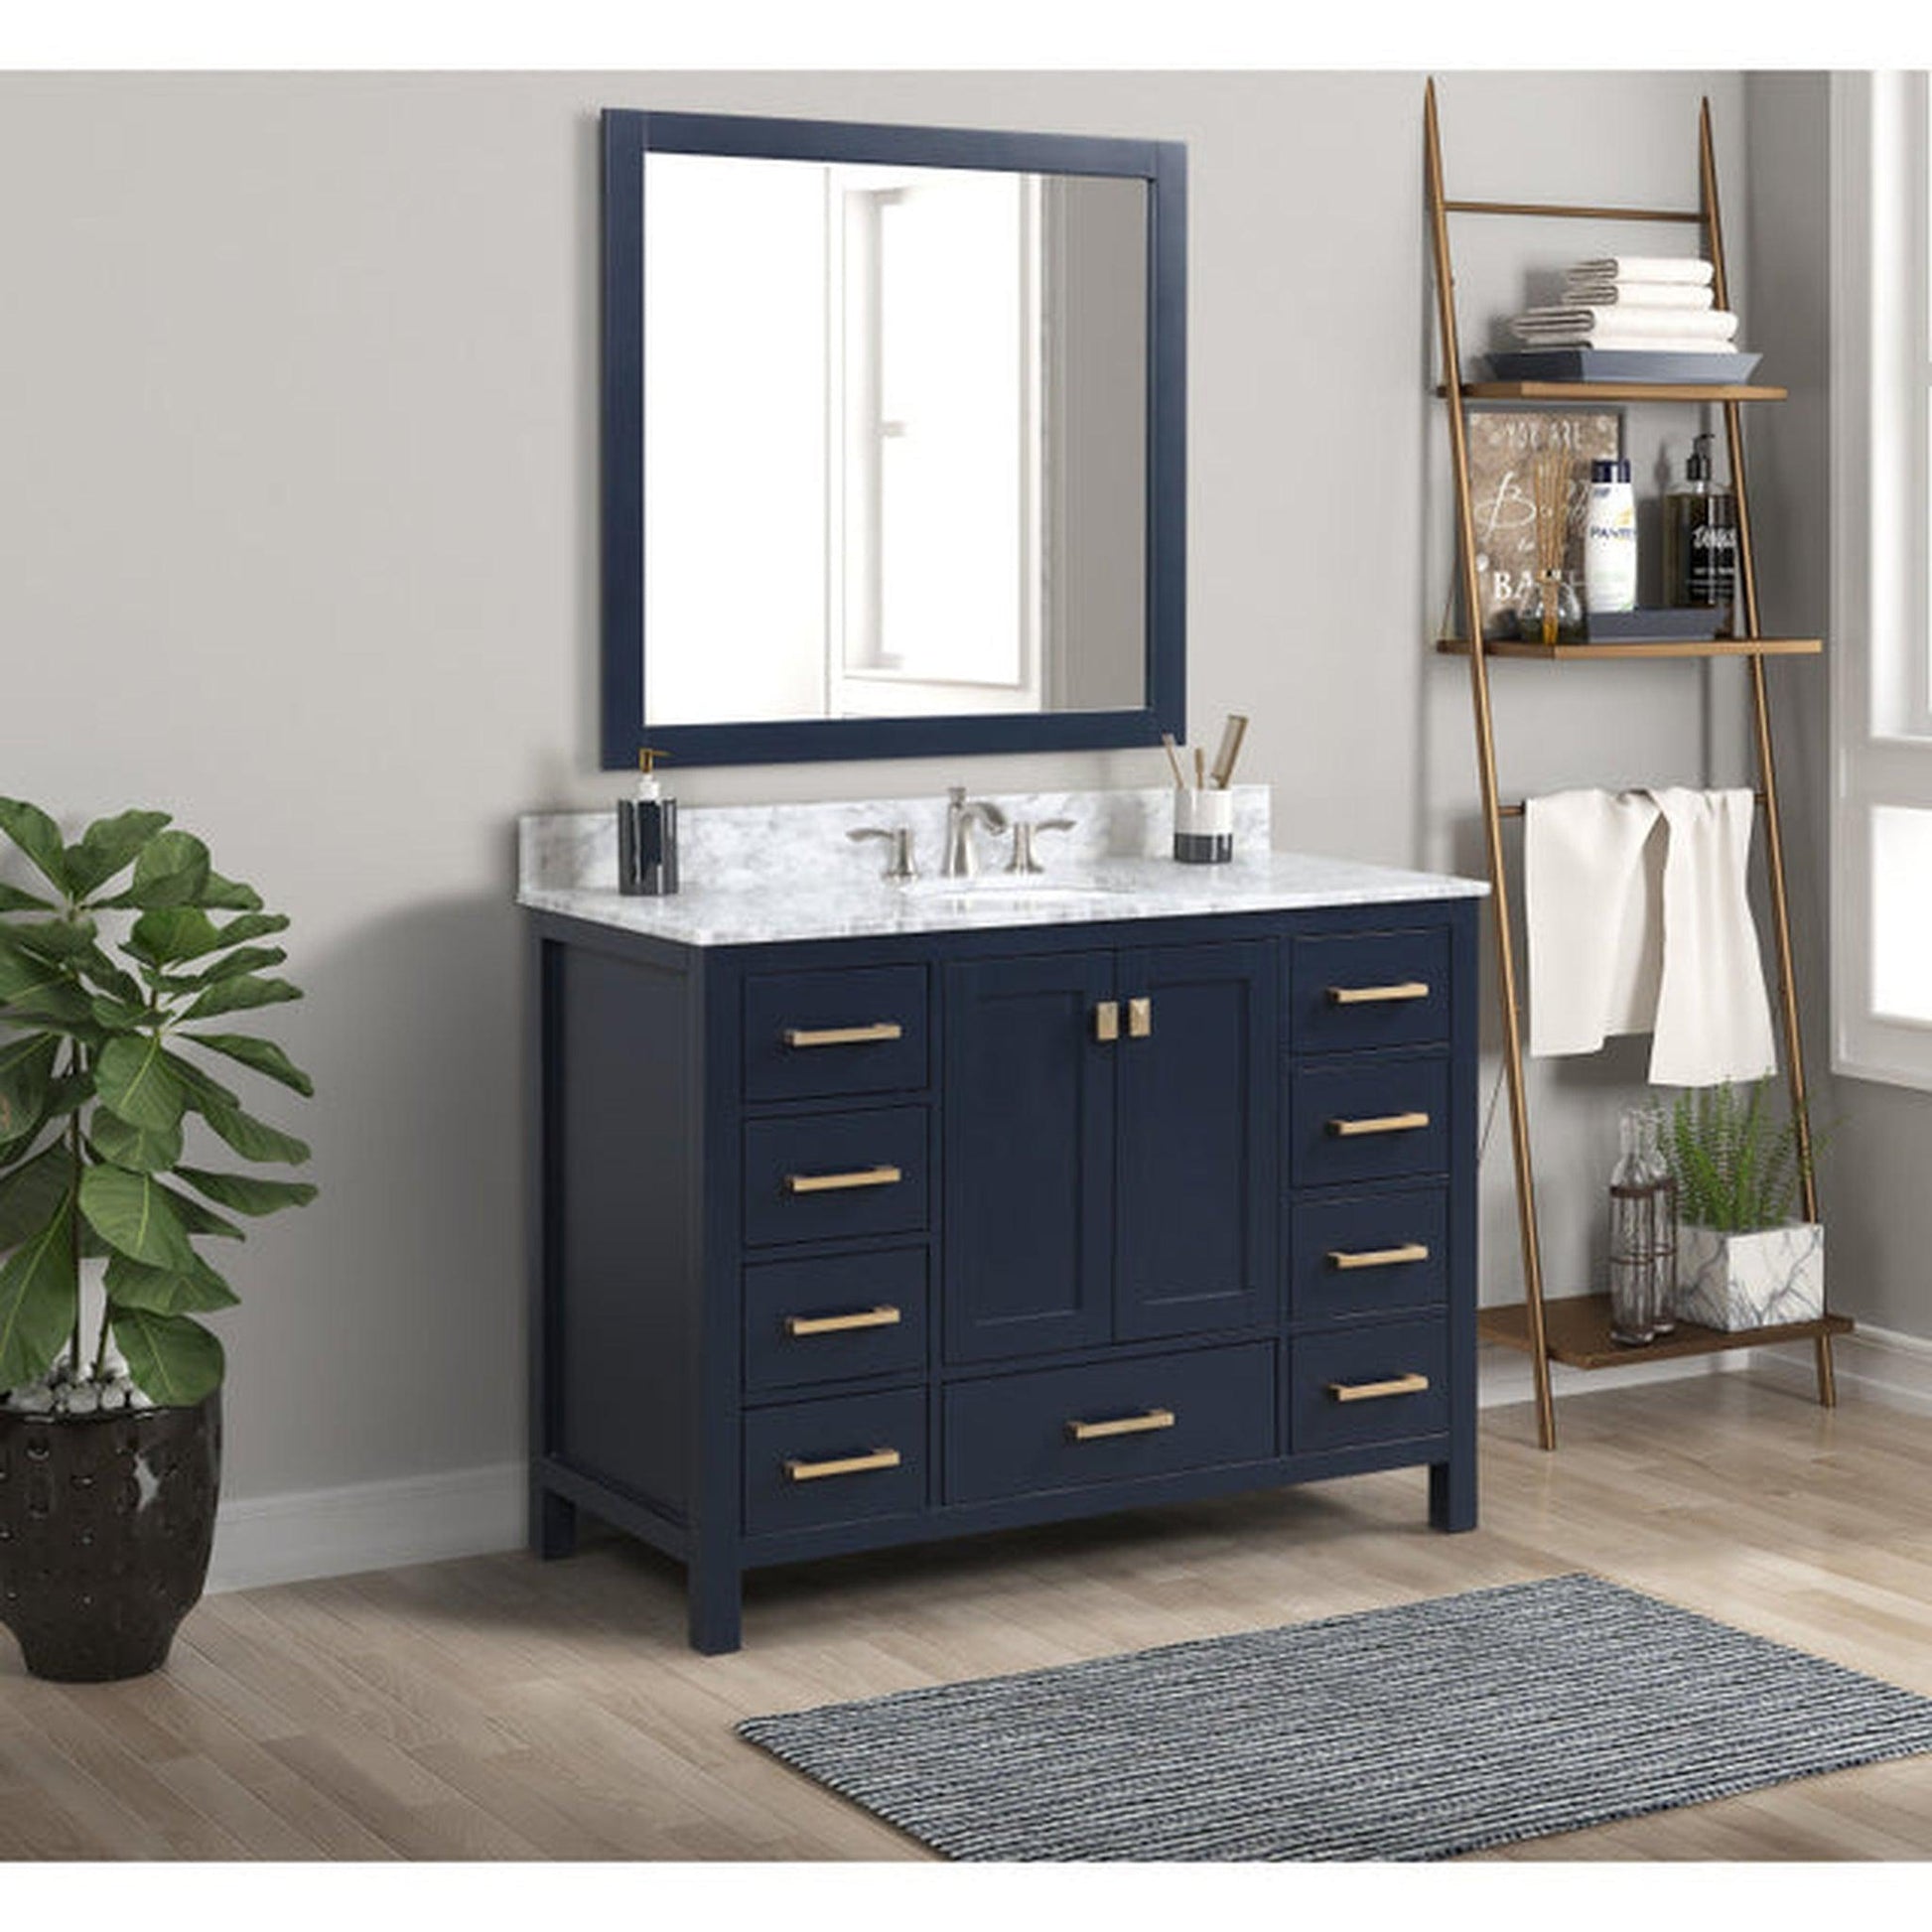 ANZZI Chateau Series 48" x 36" Navy Blue Solid Wood Bathroom Vanity With White Carrara Marble Countertop, Basin Sink and Mirror